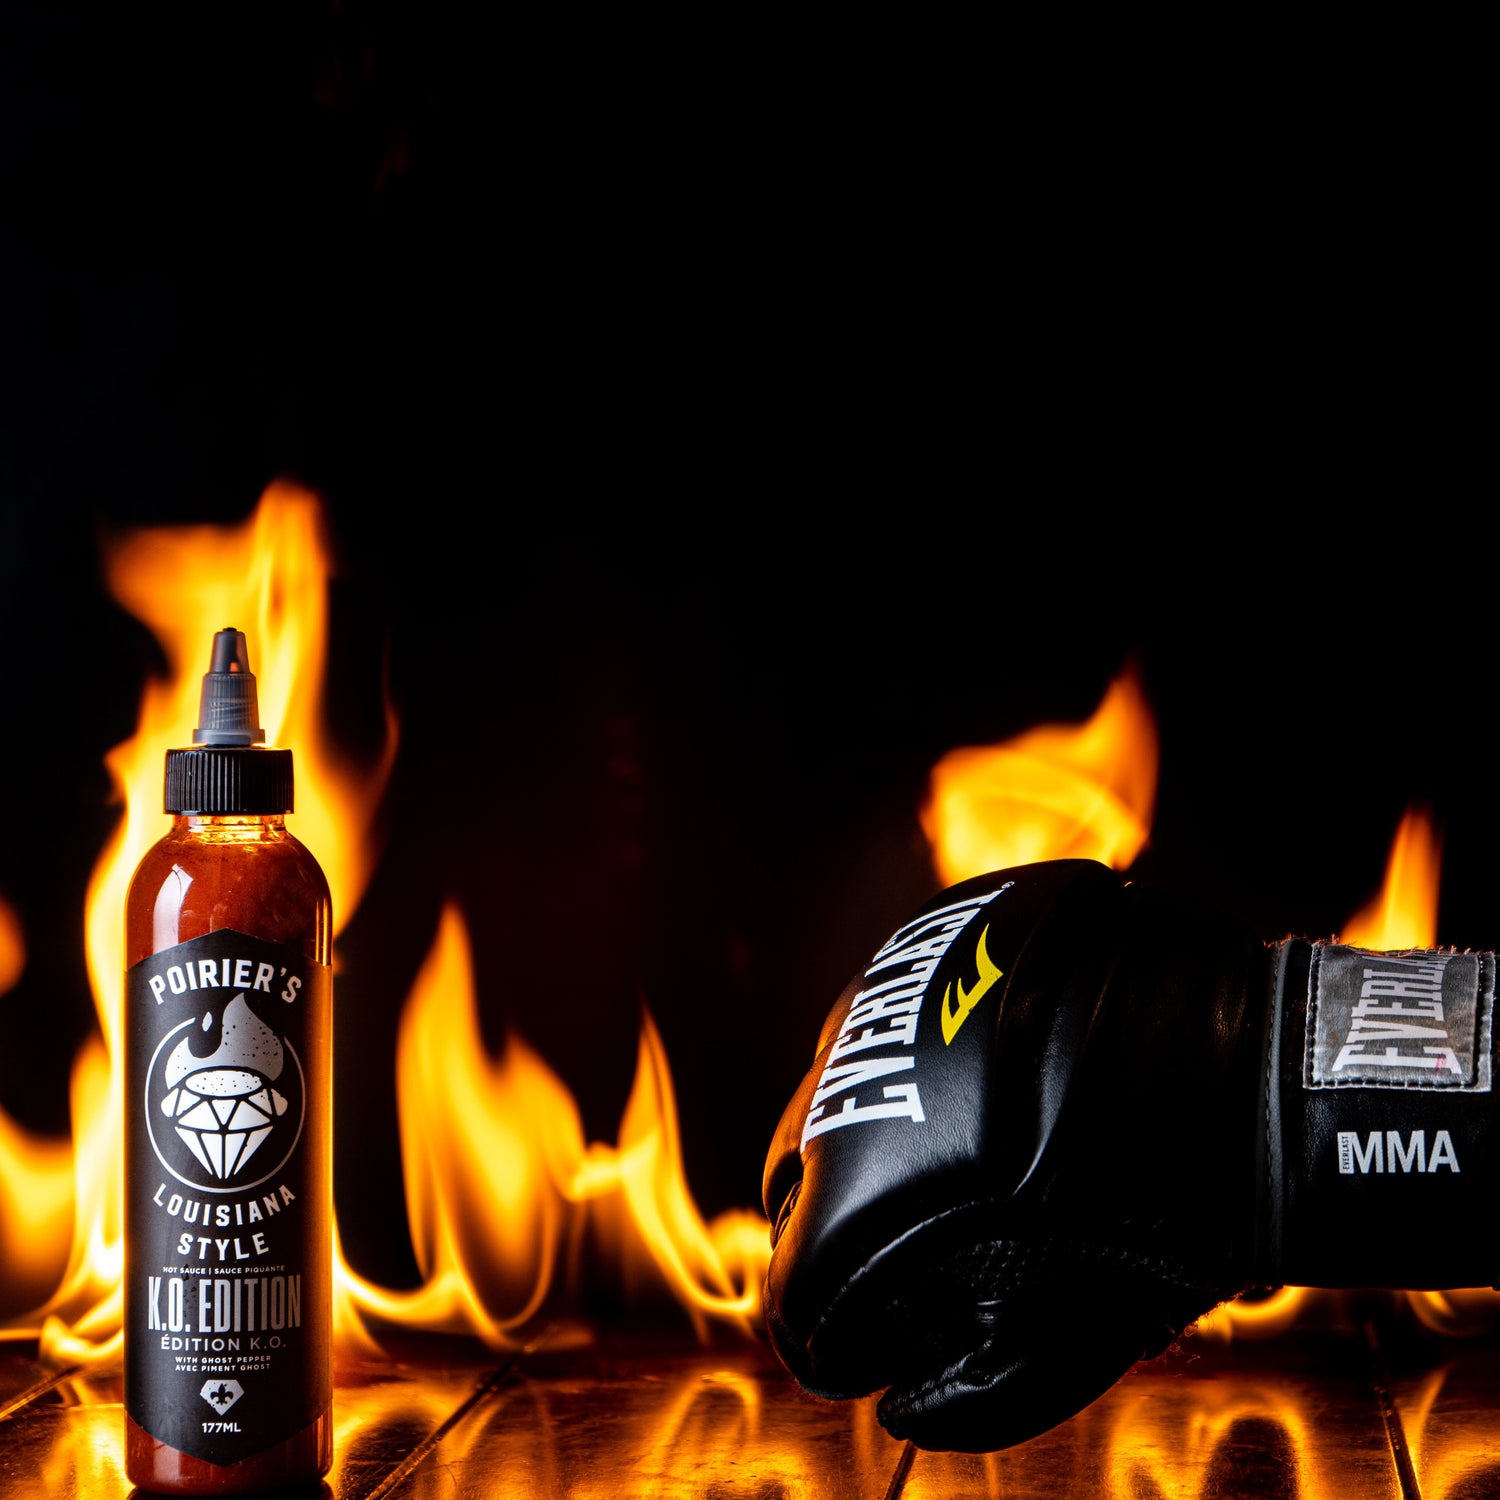 A bottle of hot sauce being punched by a MMA glove  on a fiery background